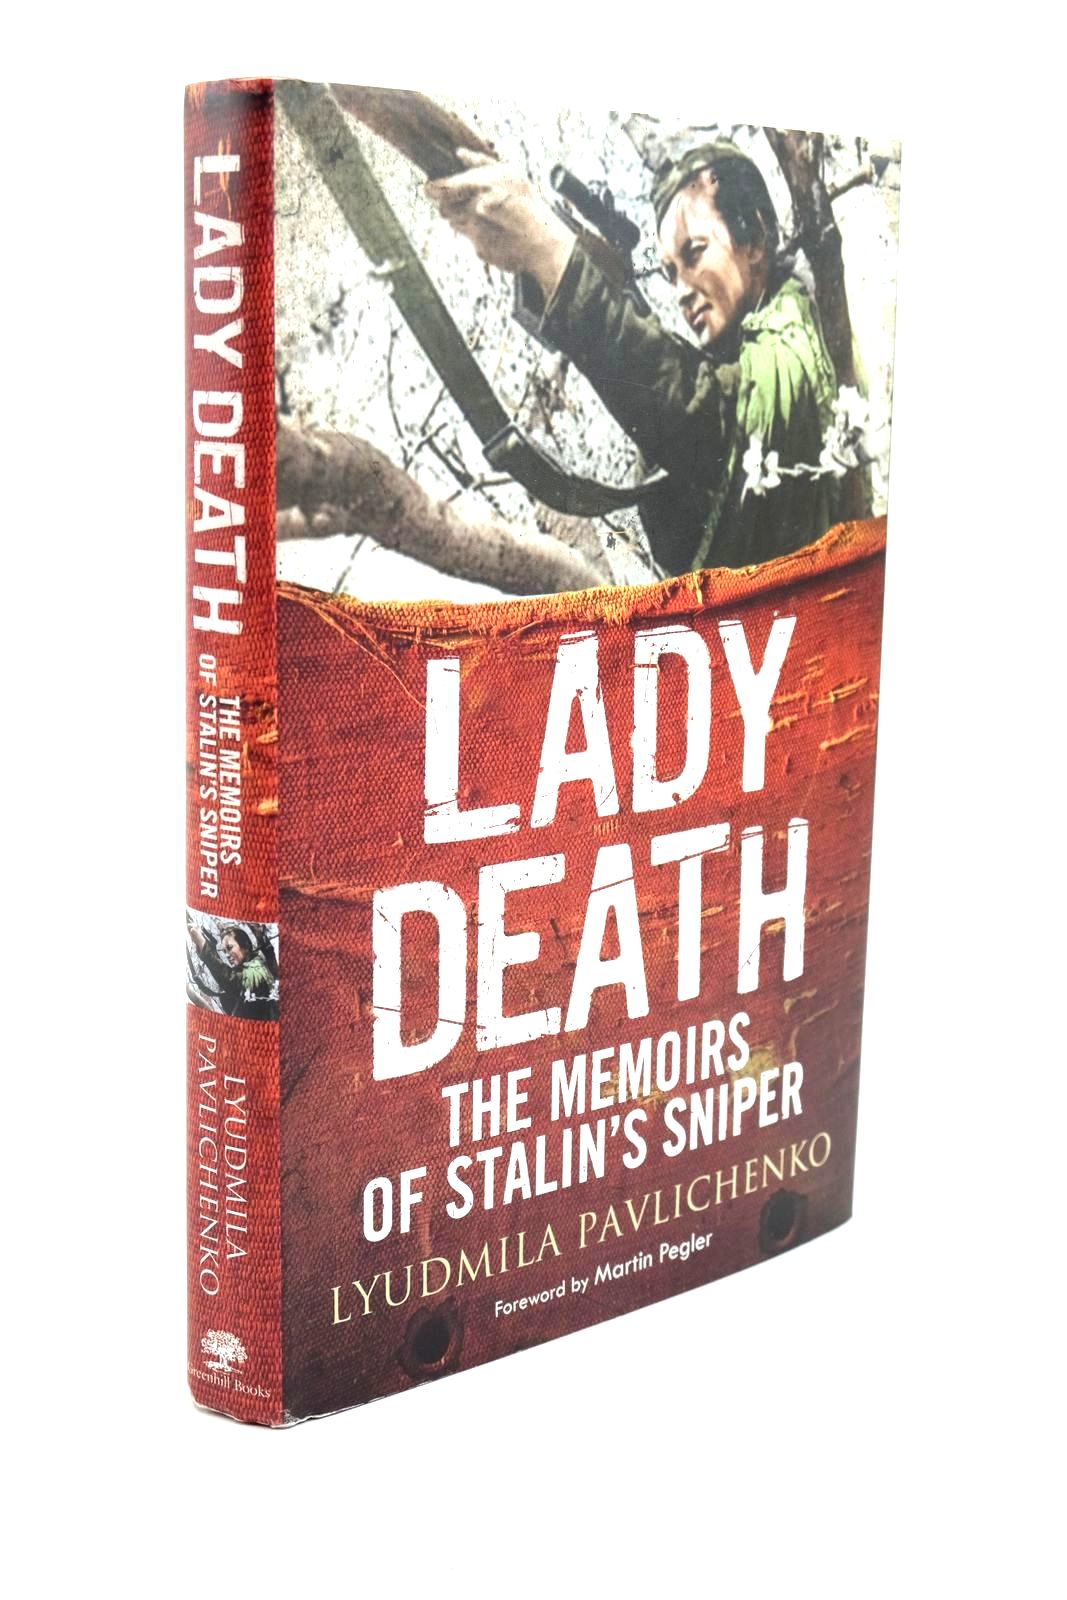 Photo of LADY DEATH THE MEMOIRS OF STALIN'S SNIPER- Stock Number: 1321486